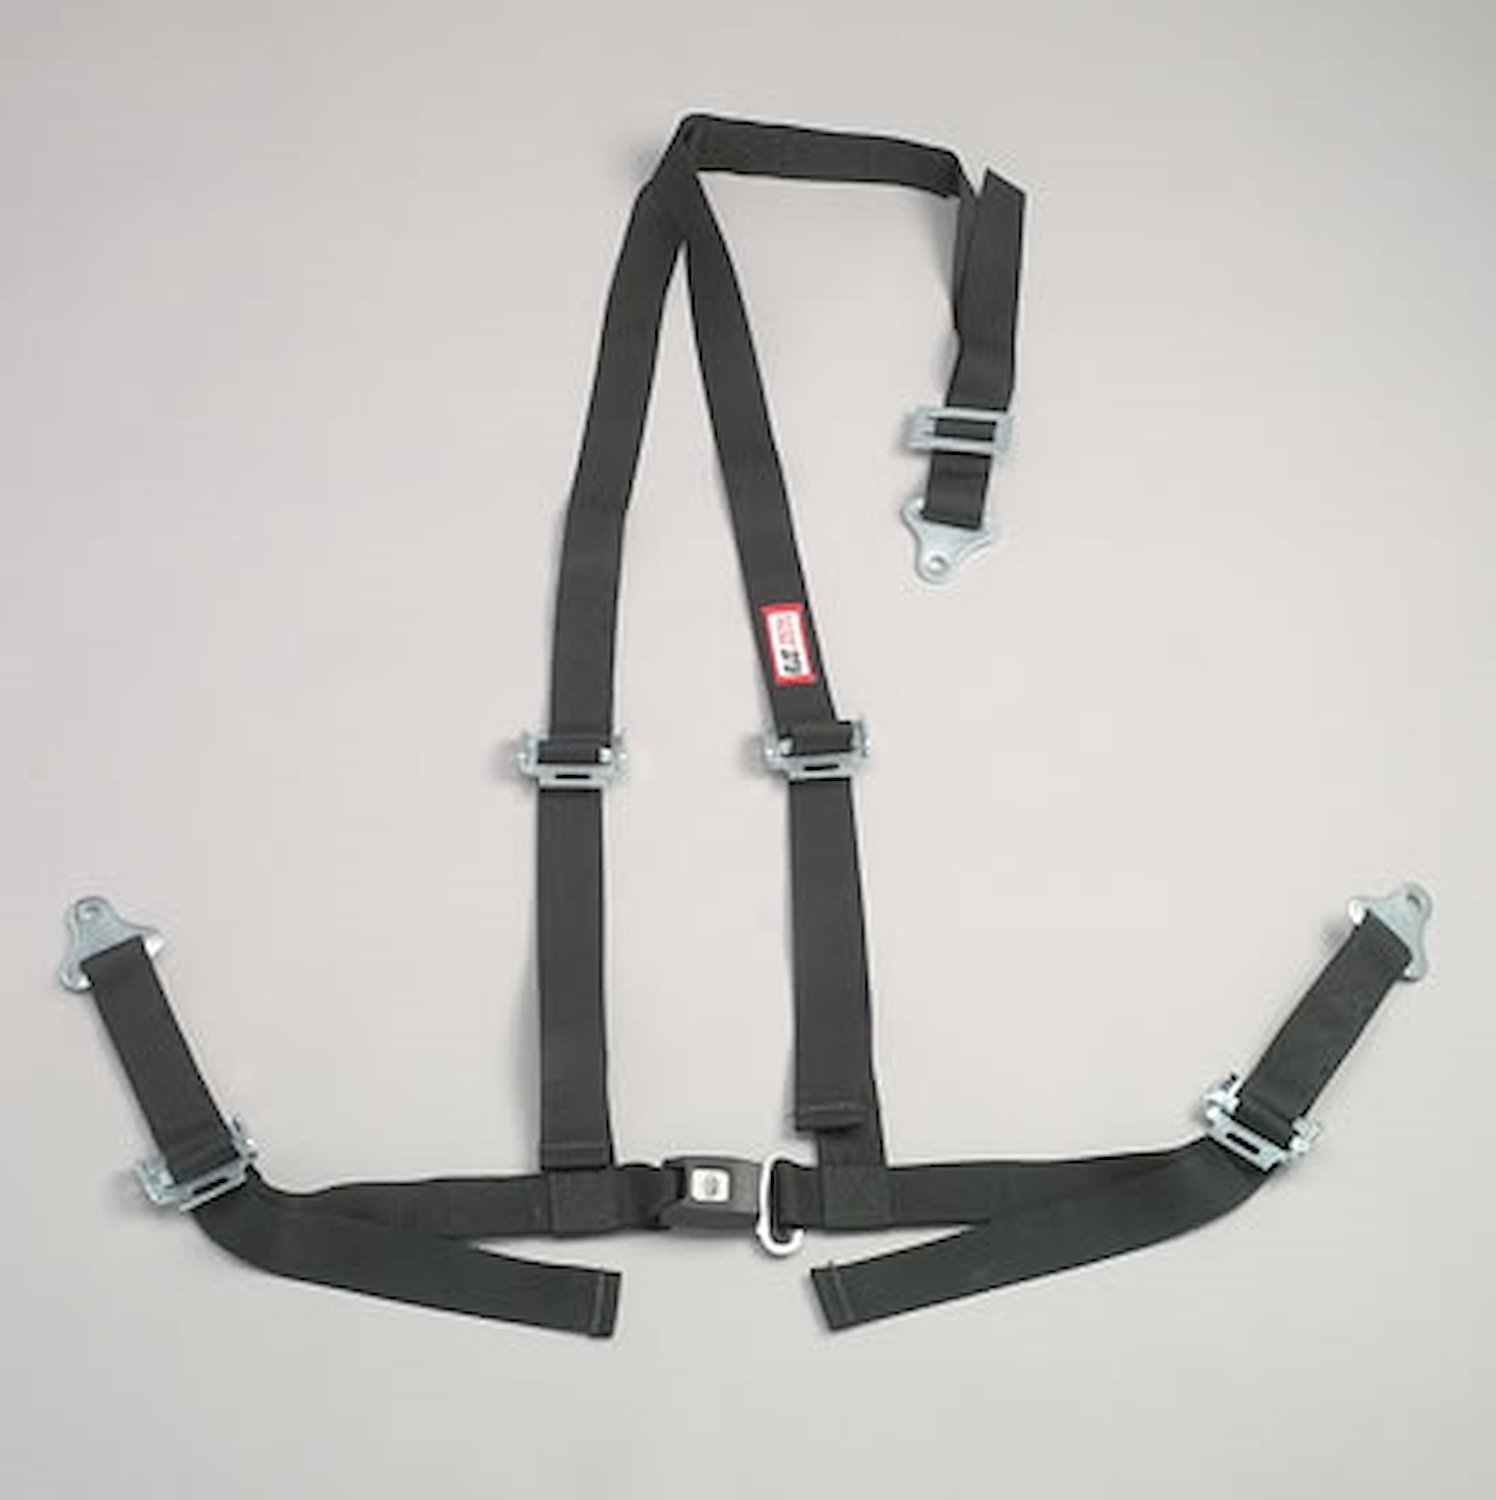 NON-SFI B&T HARNESS 2 PULL UP Lap Belt 2 S. H. Individual ROLL BAR Mount ALL WRAP ENDS w/STERNUM STRAP YELLOW